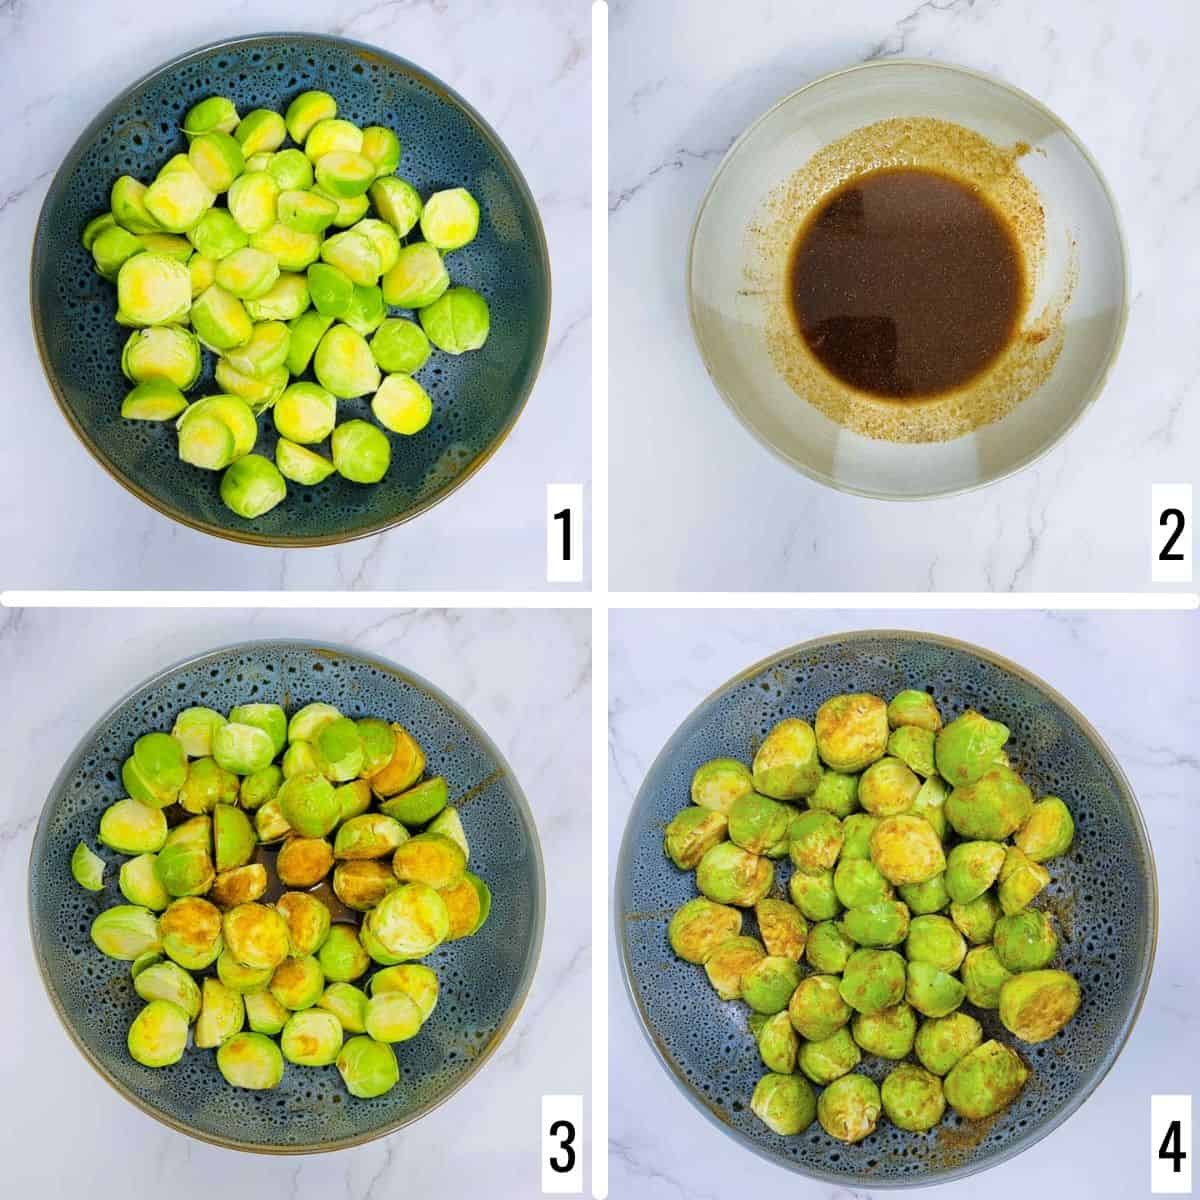 A 4-picture collage of steps showing mixing and rubbing the spices on the sprouts.